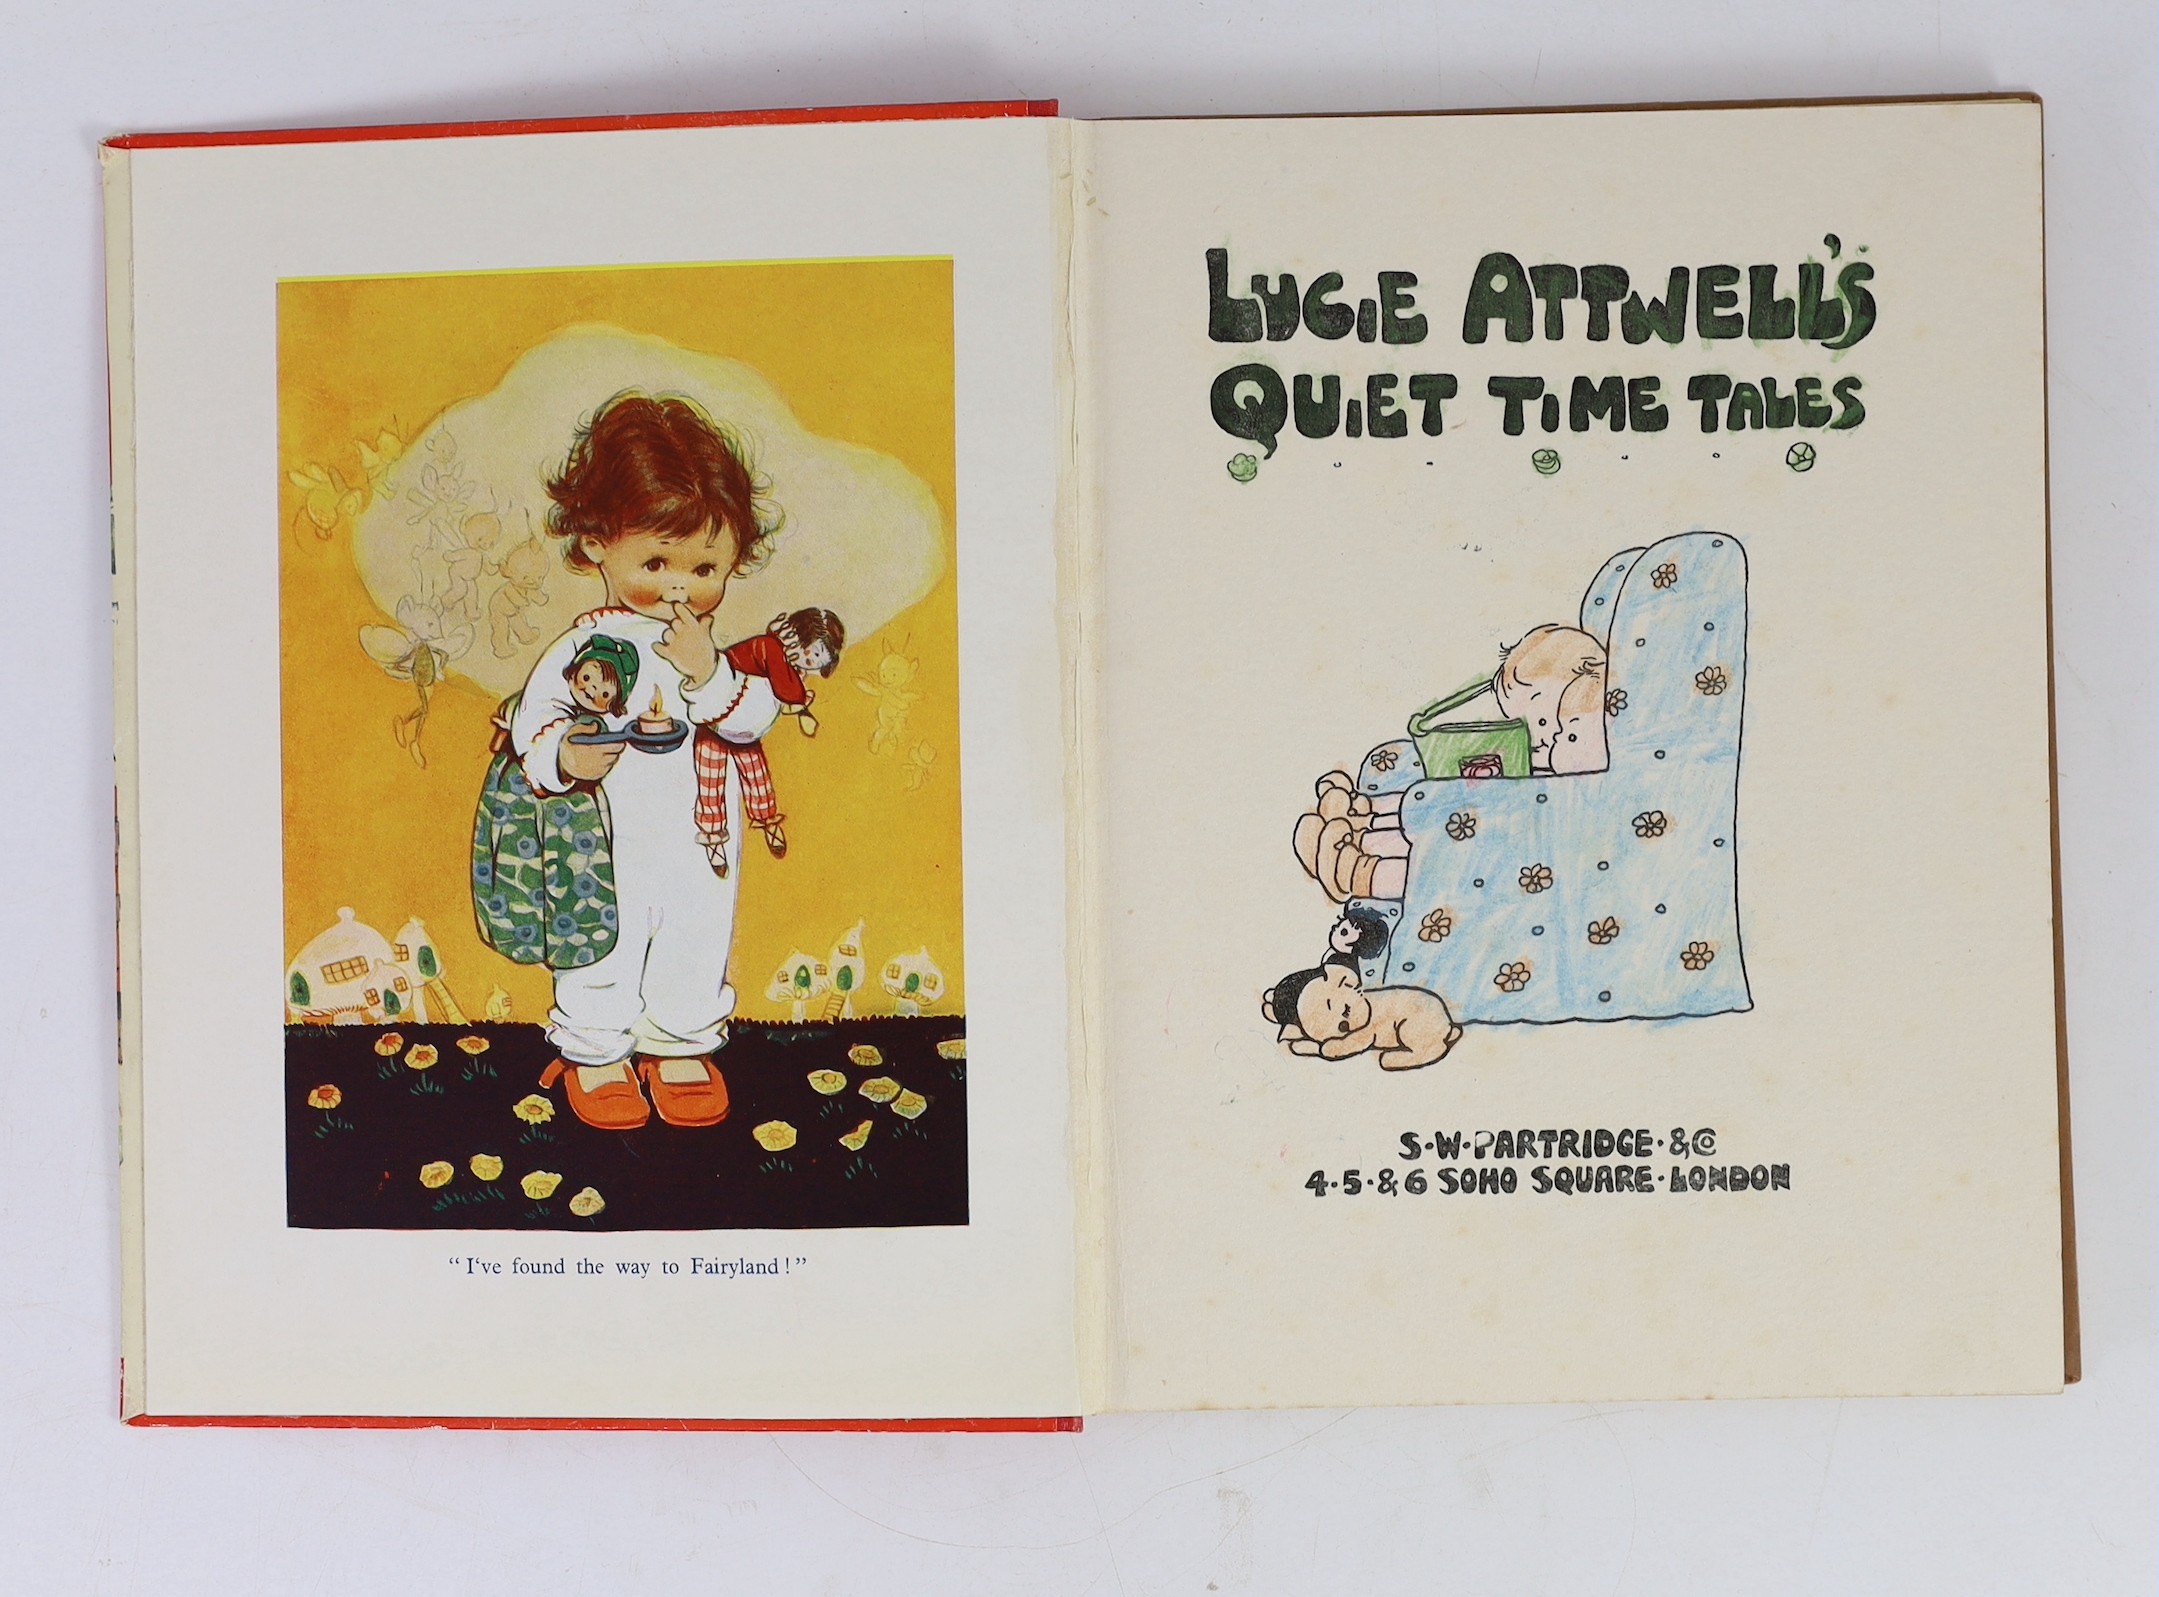 Three early 20th century Children’s works - Attwell, Mabel Lucy - Quiet Time Tales, some plates coloured by infants, S.W. Partridge, 1933; Talbot, Ethel - Farmer John’s Tales, childish inscription to title verso, Ladybir